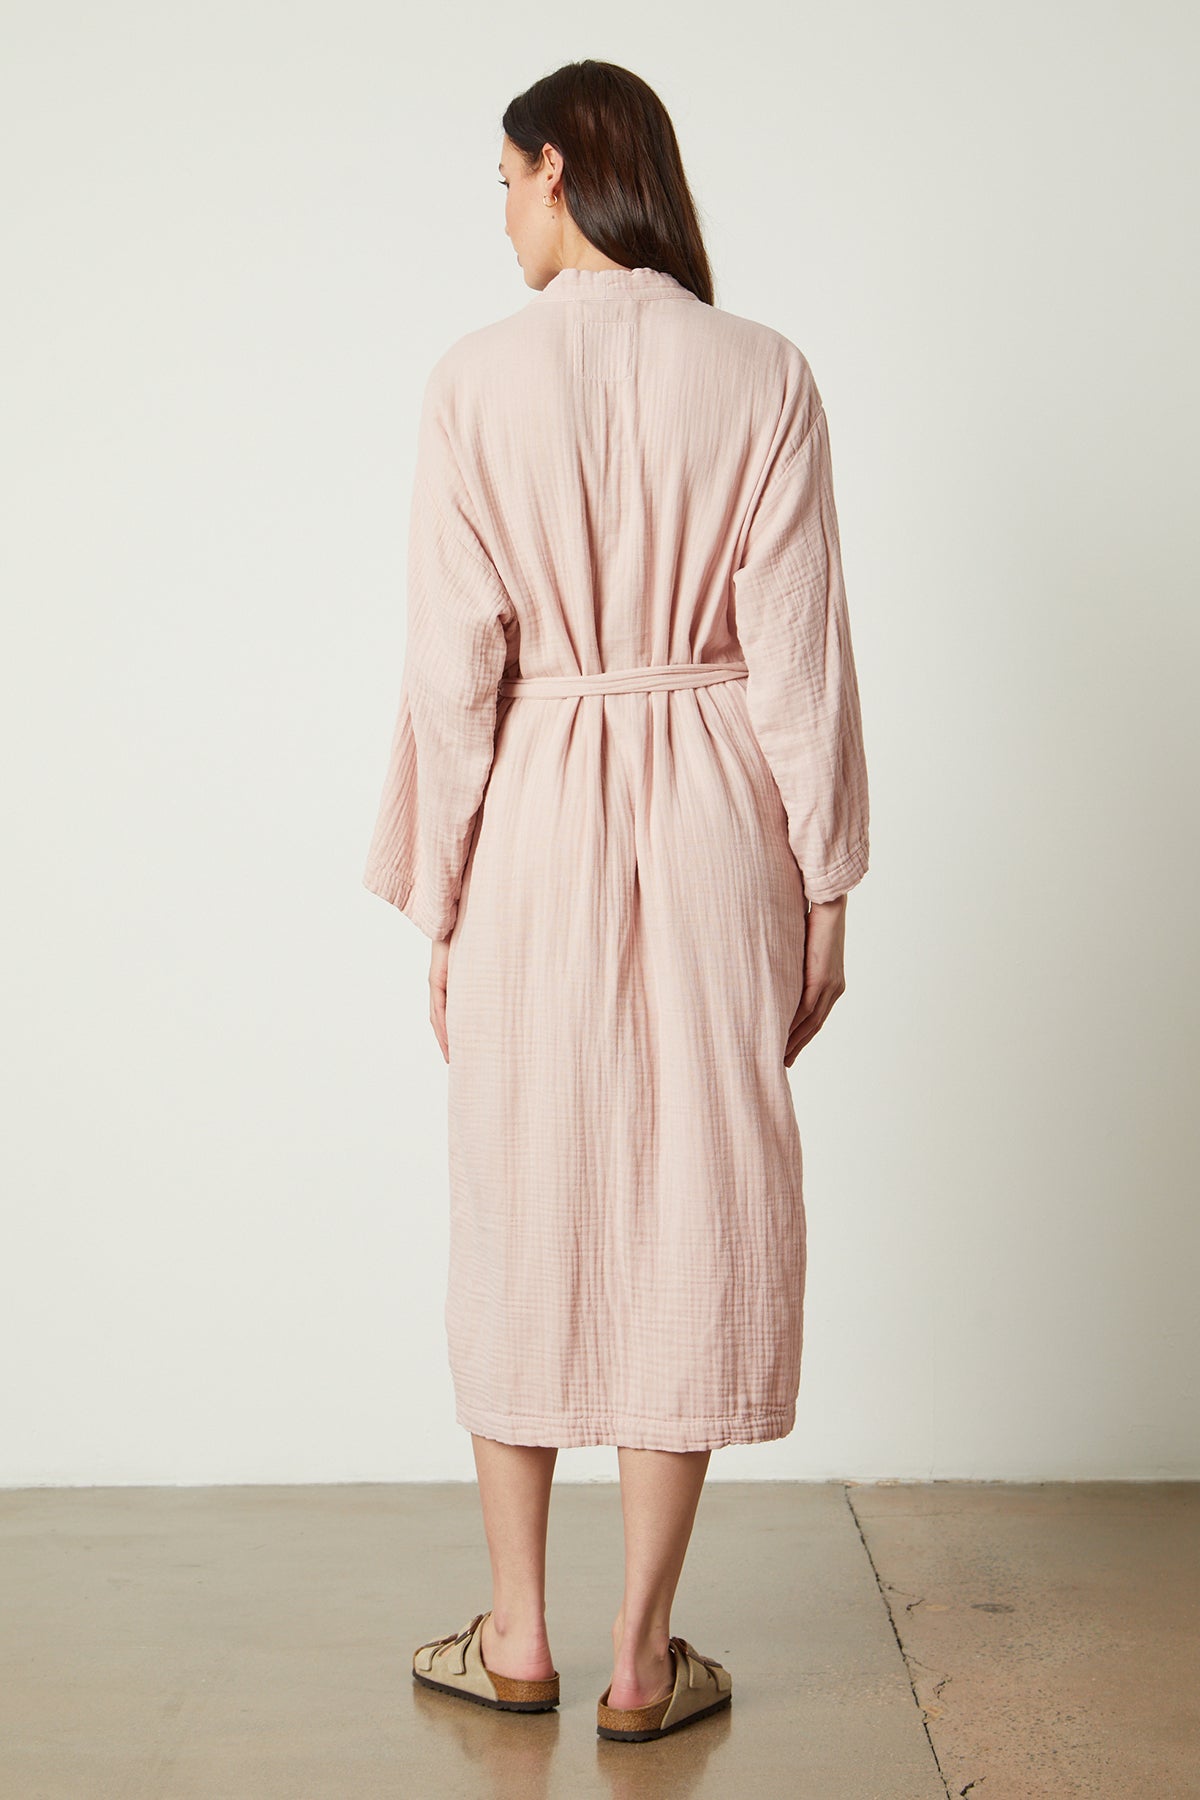 The back view of a woman wearing a Jenny Graham Home pink linen robe.-25519573598401